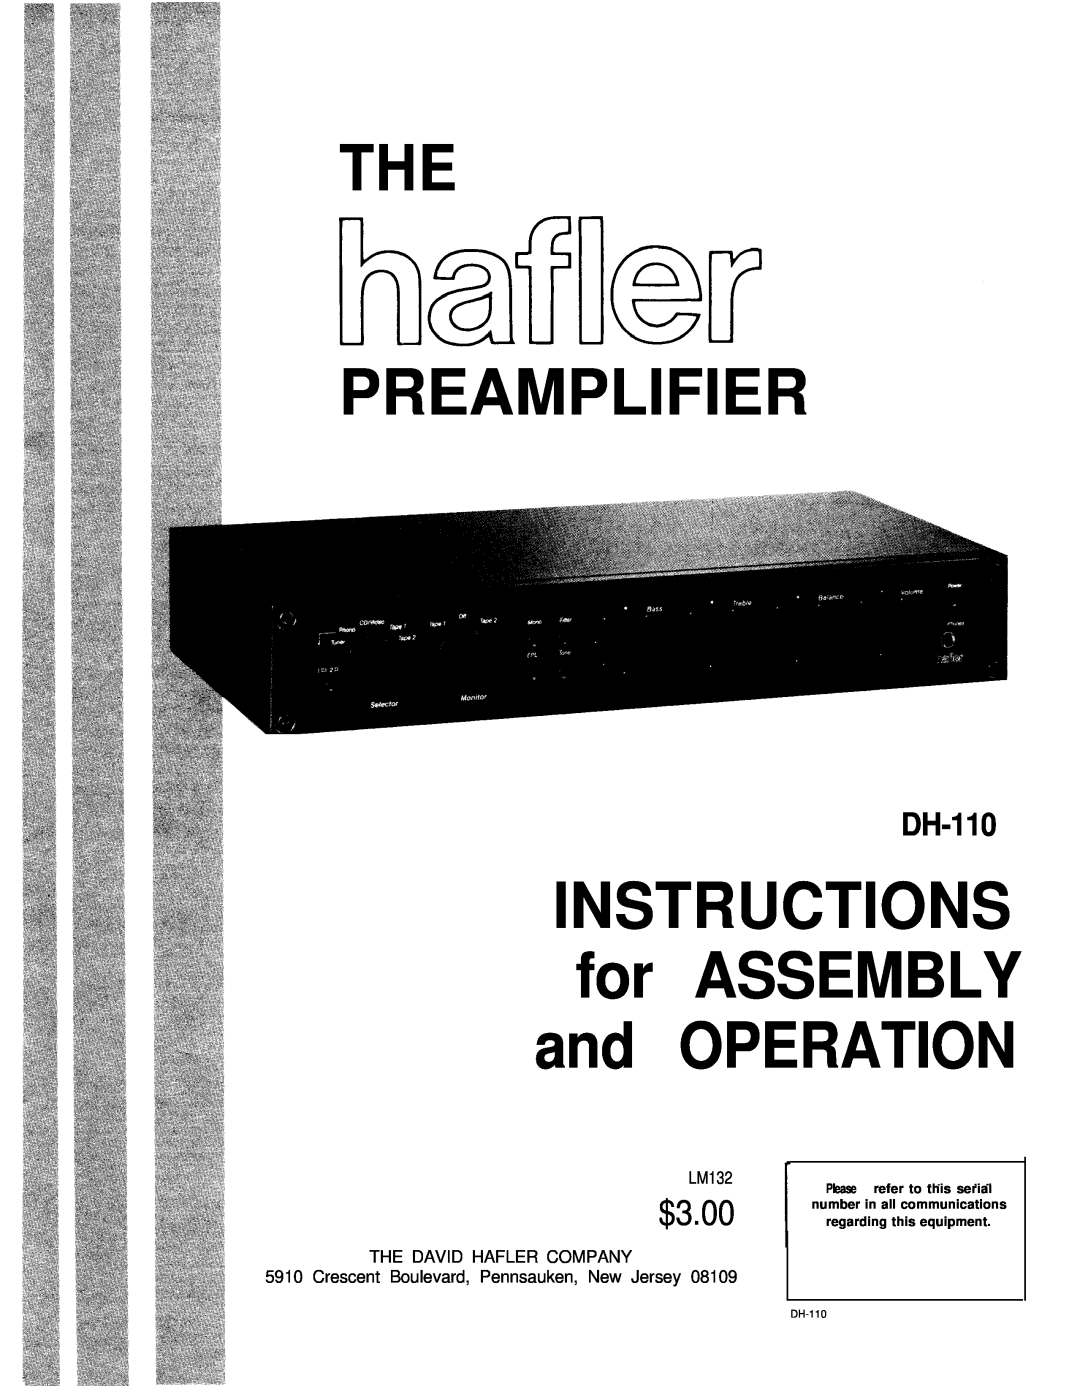 Hafler DH-110 manual The Preamplifier, INSTRUCTIONS for ASSEMBLY and OPERATION, $3.00, LM132, The David Hafler Company 